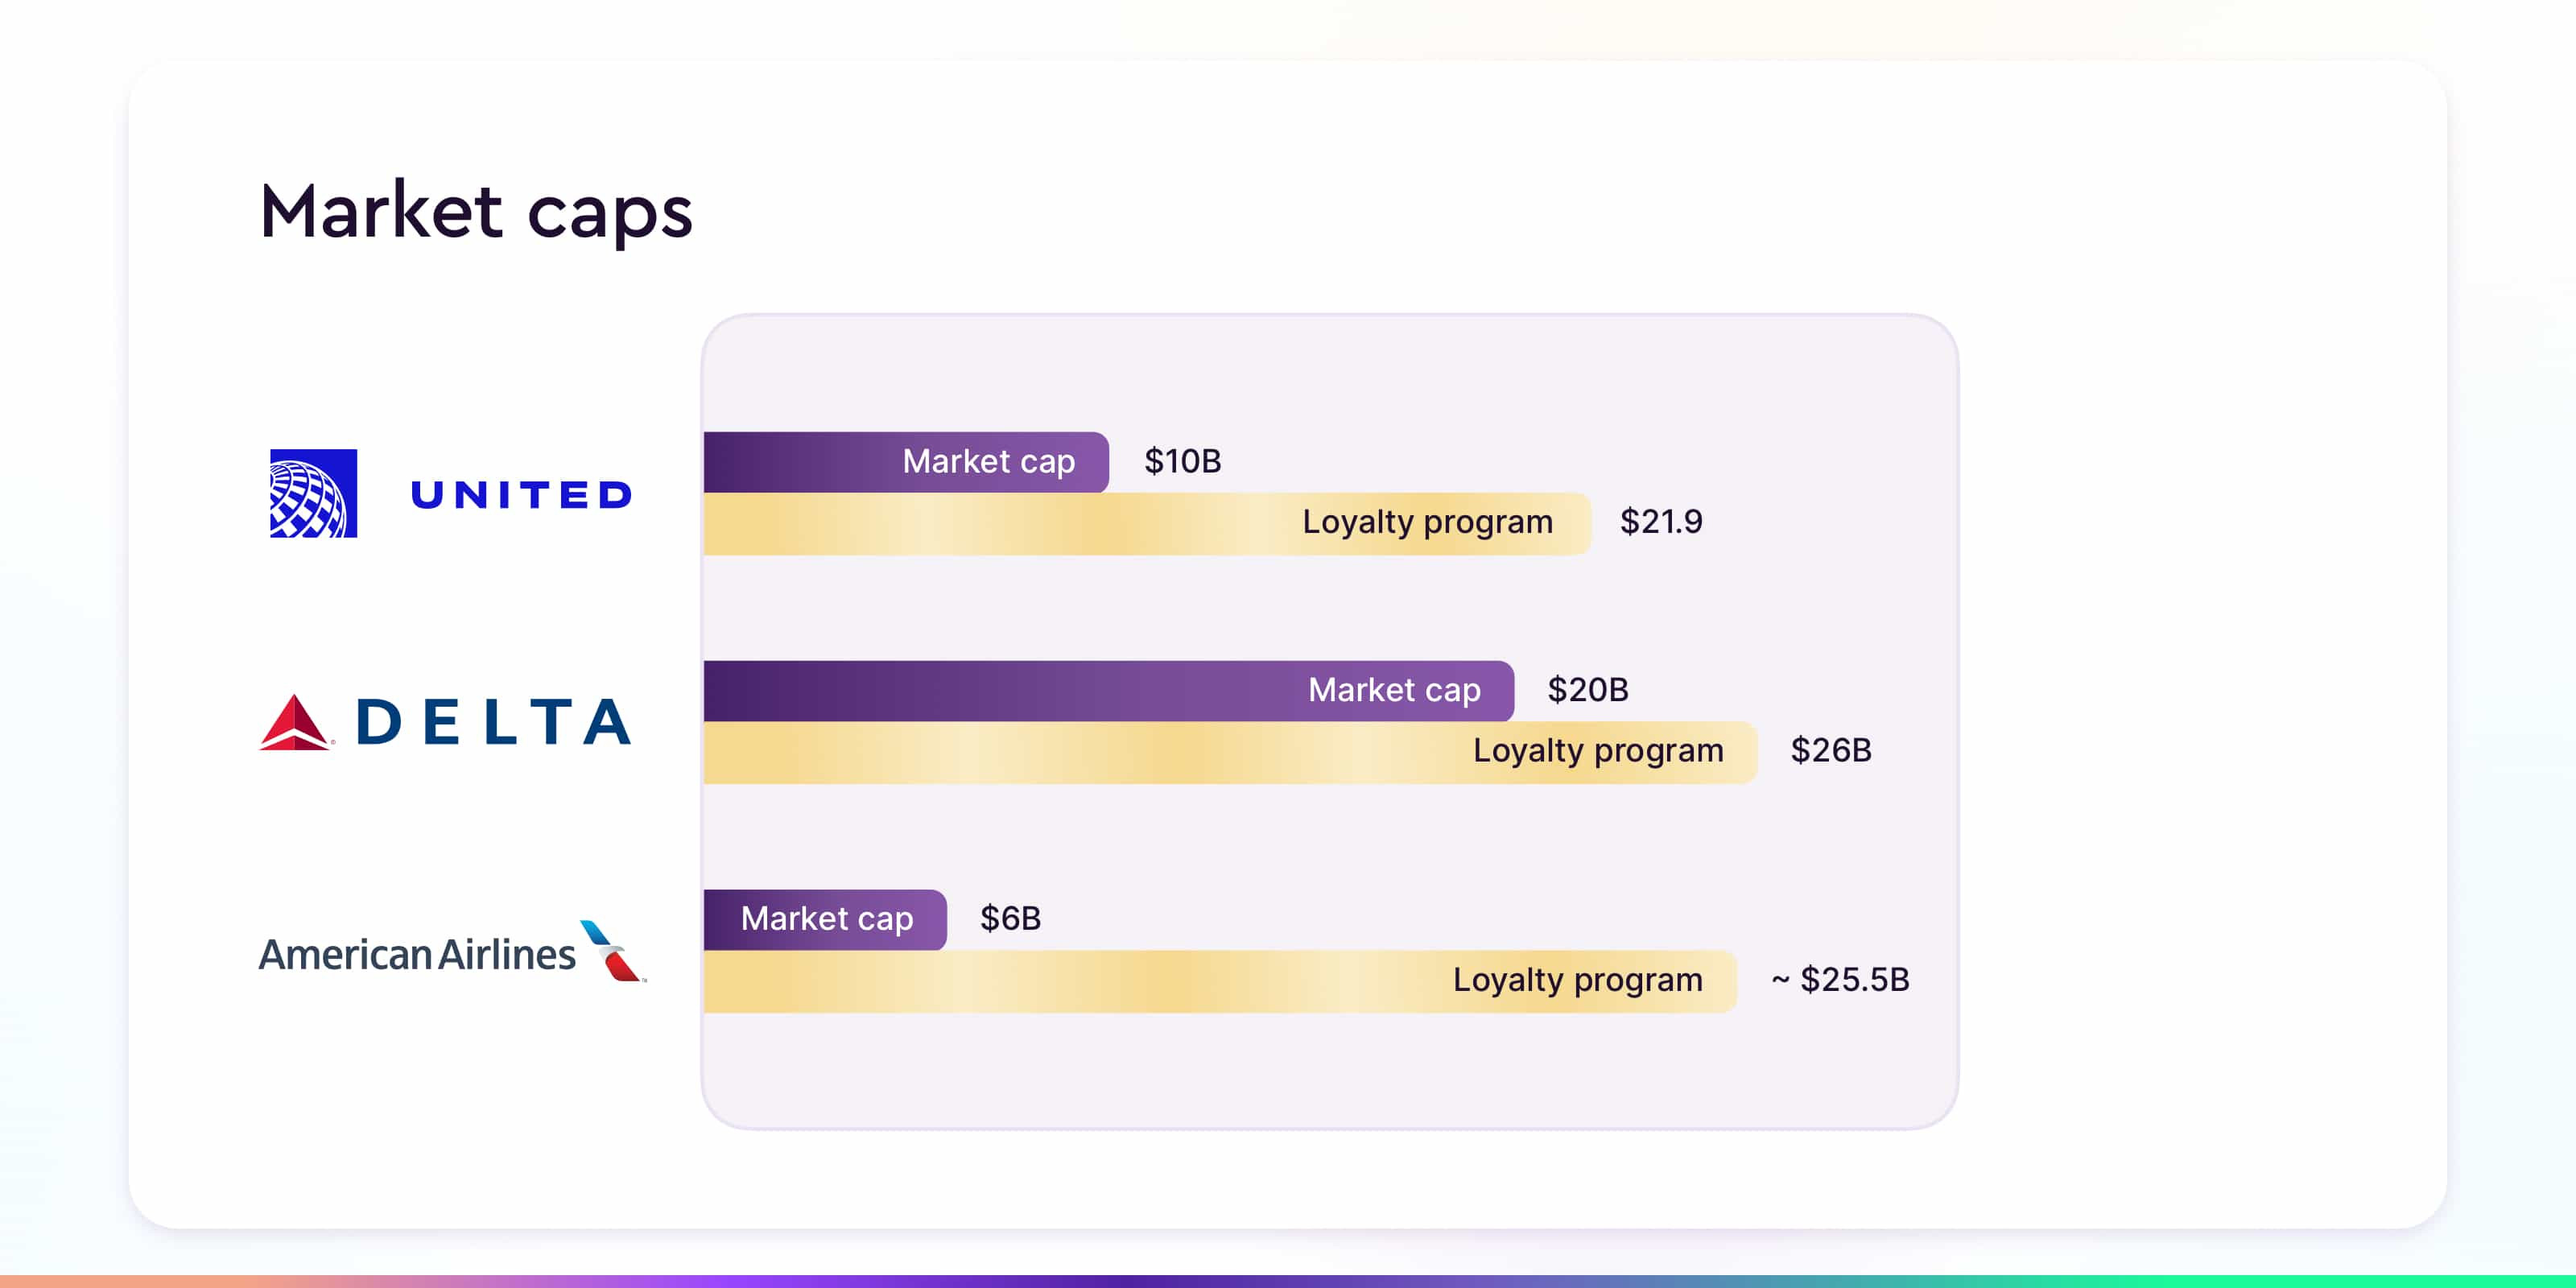 Market caps of airlines vs their loyalty programs